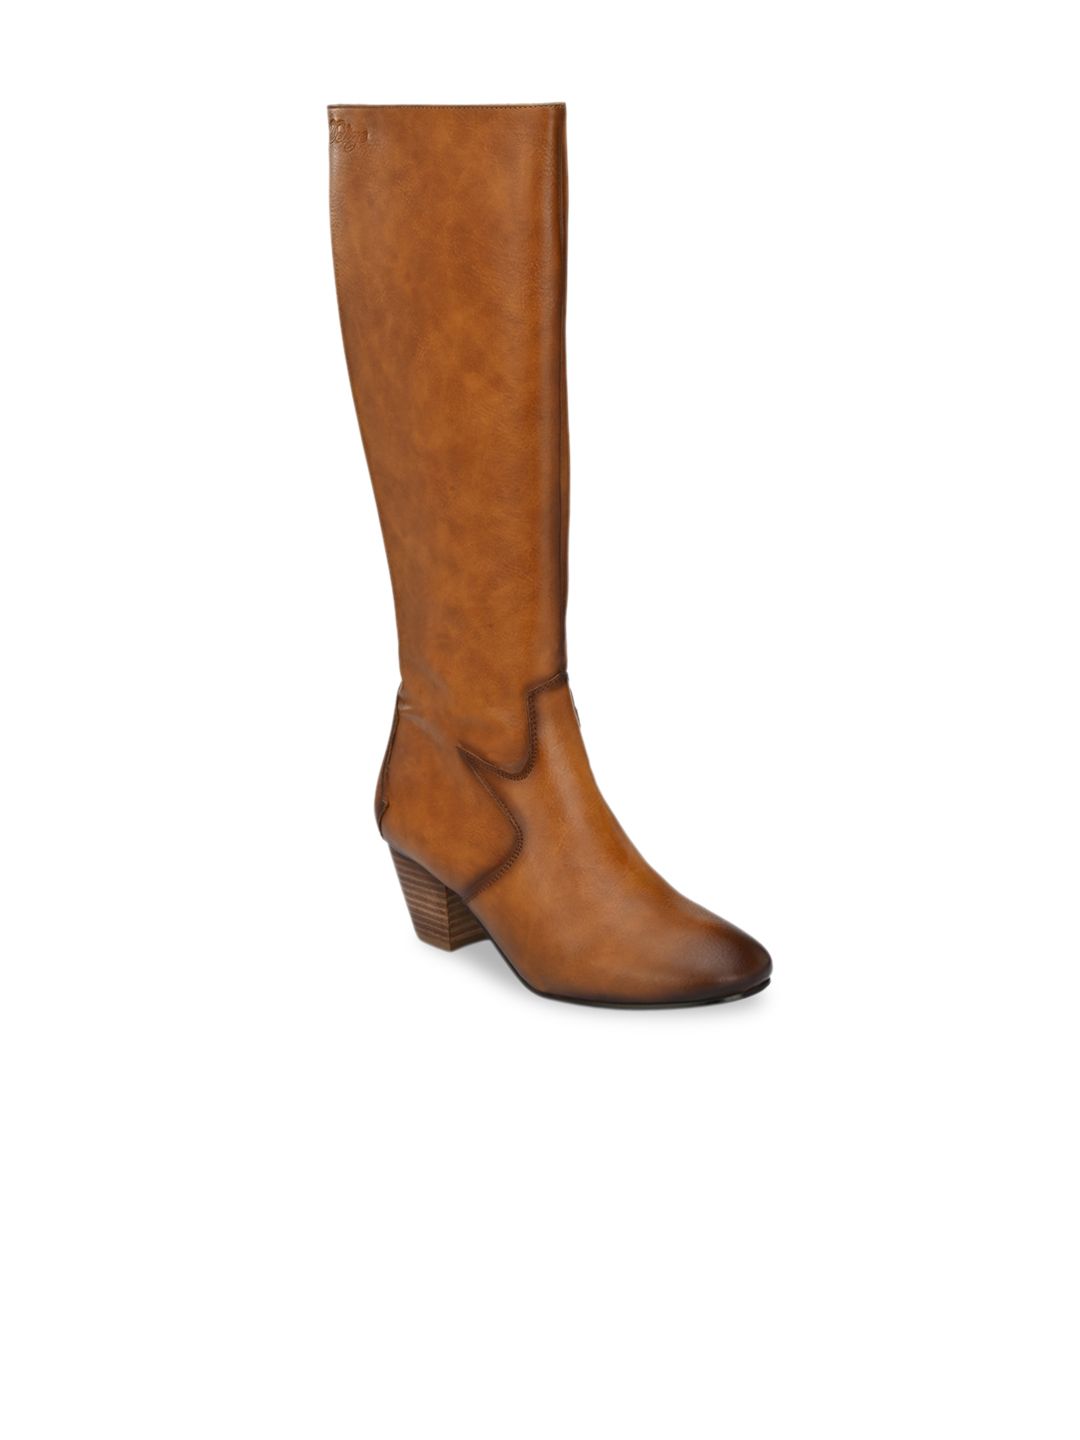 Delize Tan Block Heeled Boots Price in India